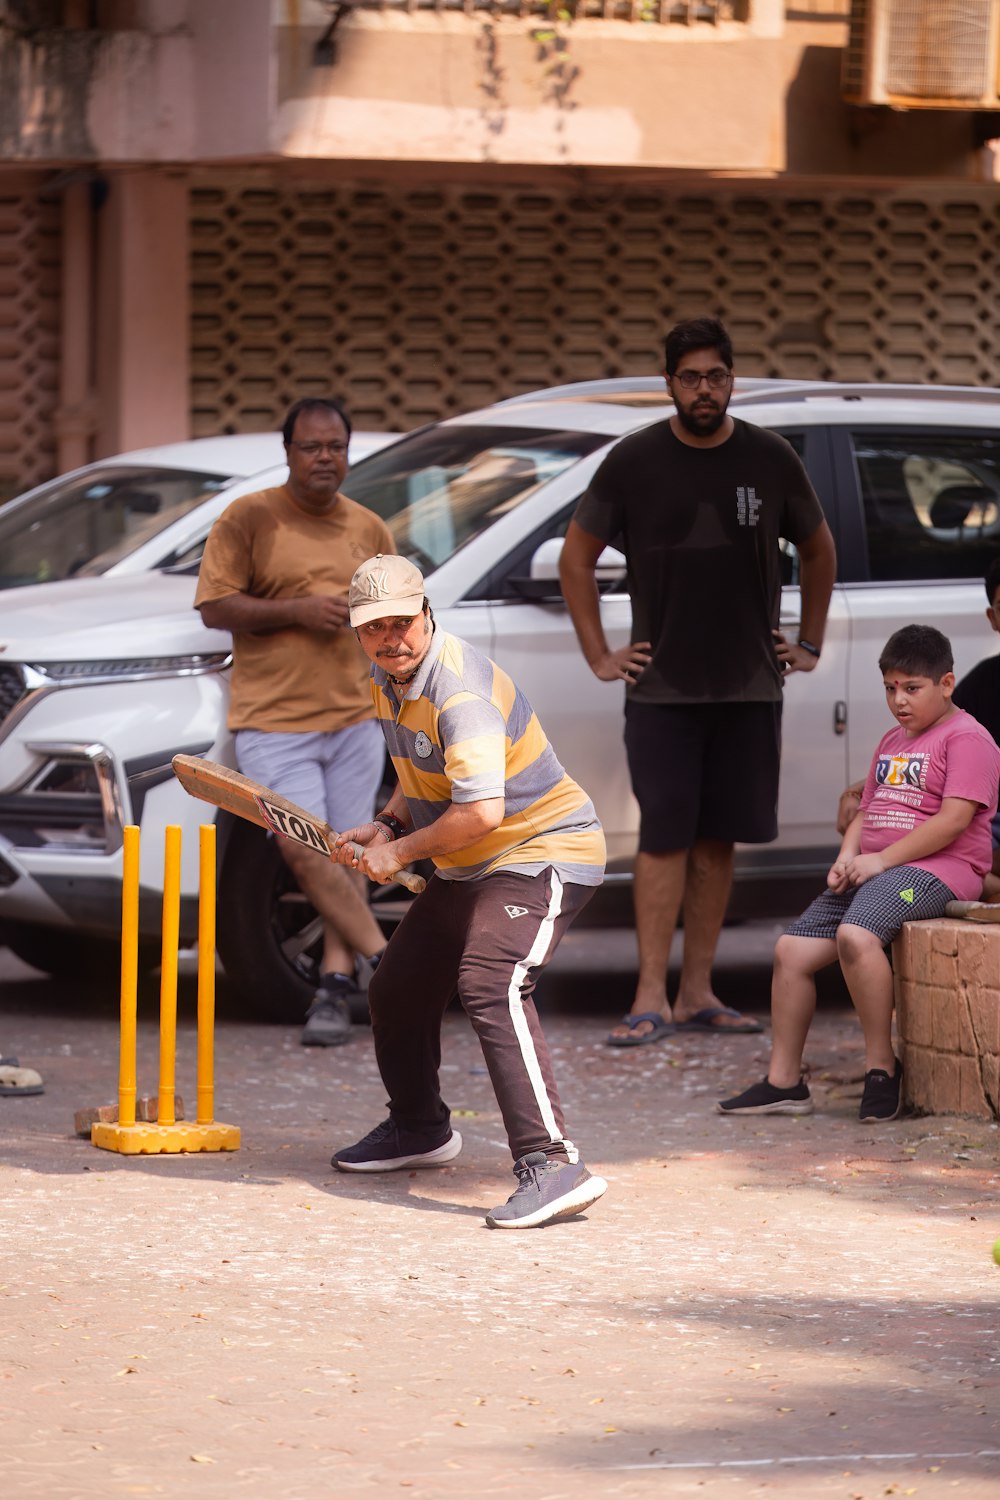 a man playing a game of cricket with a group of people watching